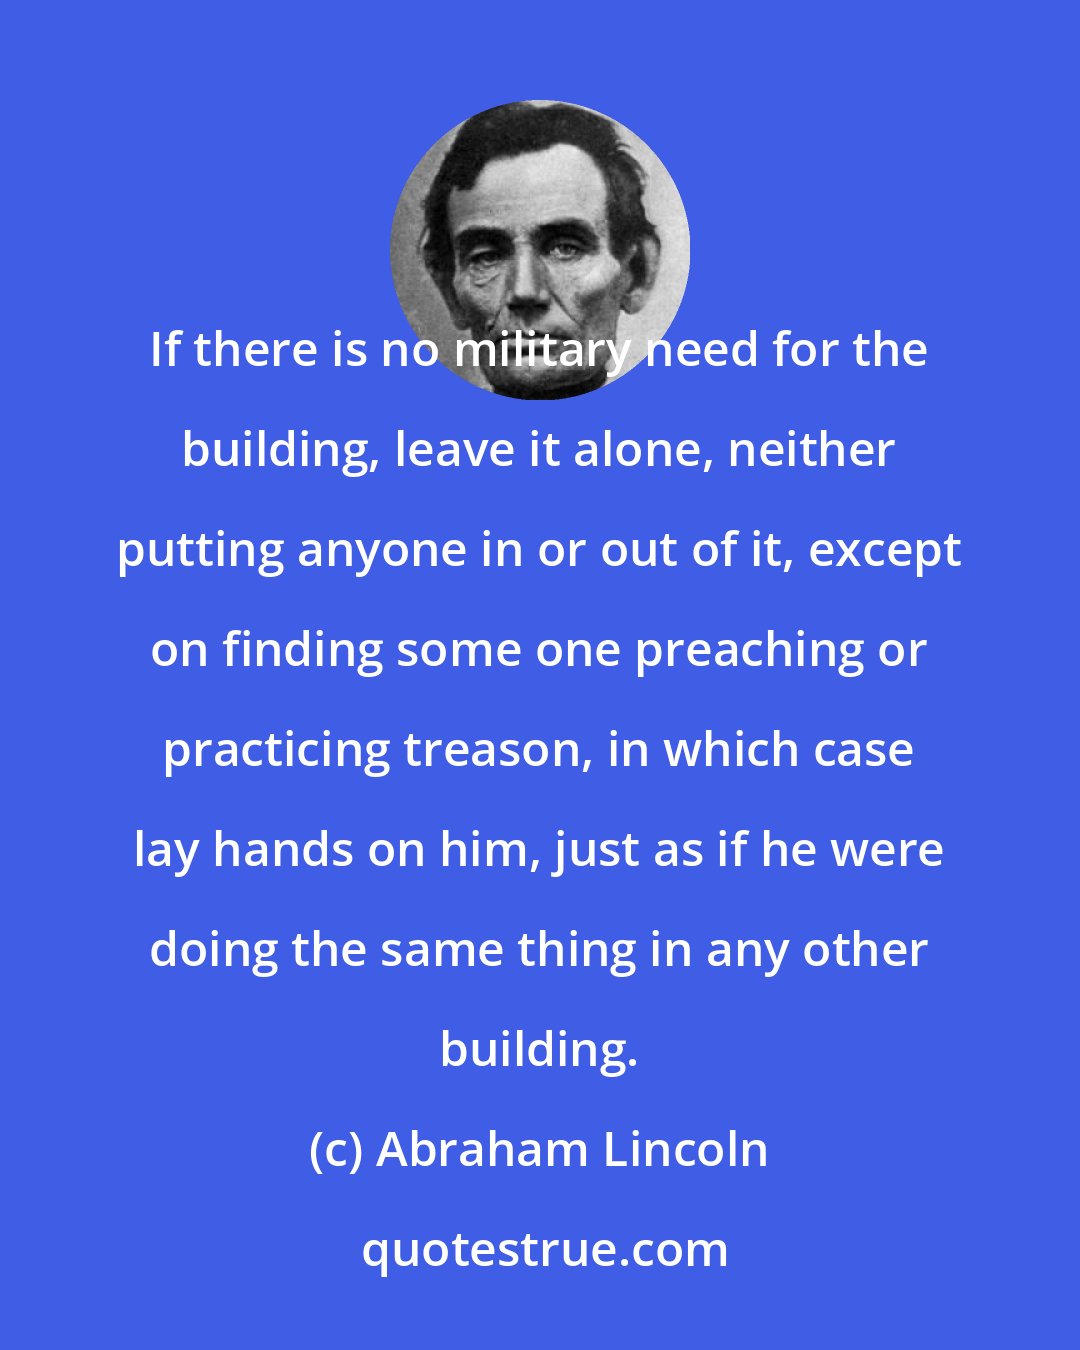 Abraham Lincoln: If there is no military need for the building, leave it alone, neither putting anyone in or out of it, except on finding some one preaching or practicing treason, in which case lay hands on him, just as if he were doing the same thing in any other building.